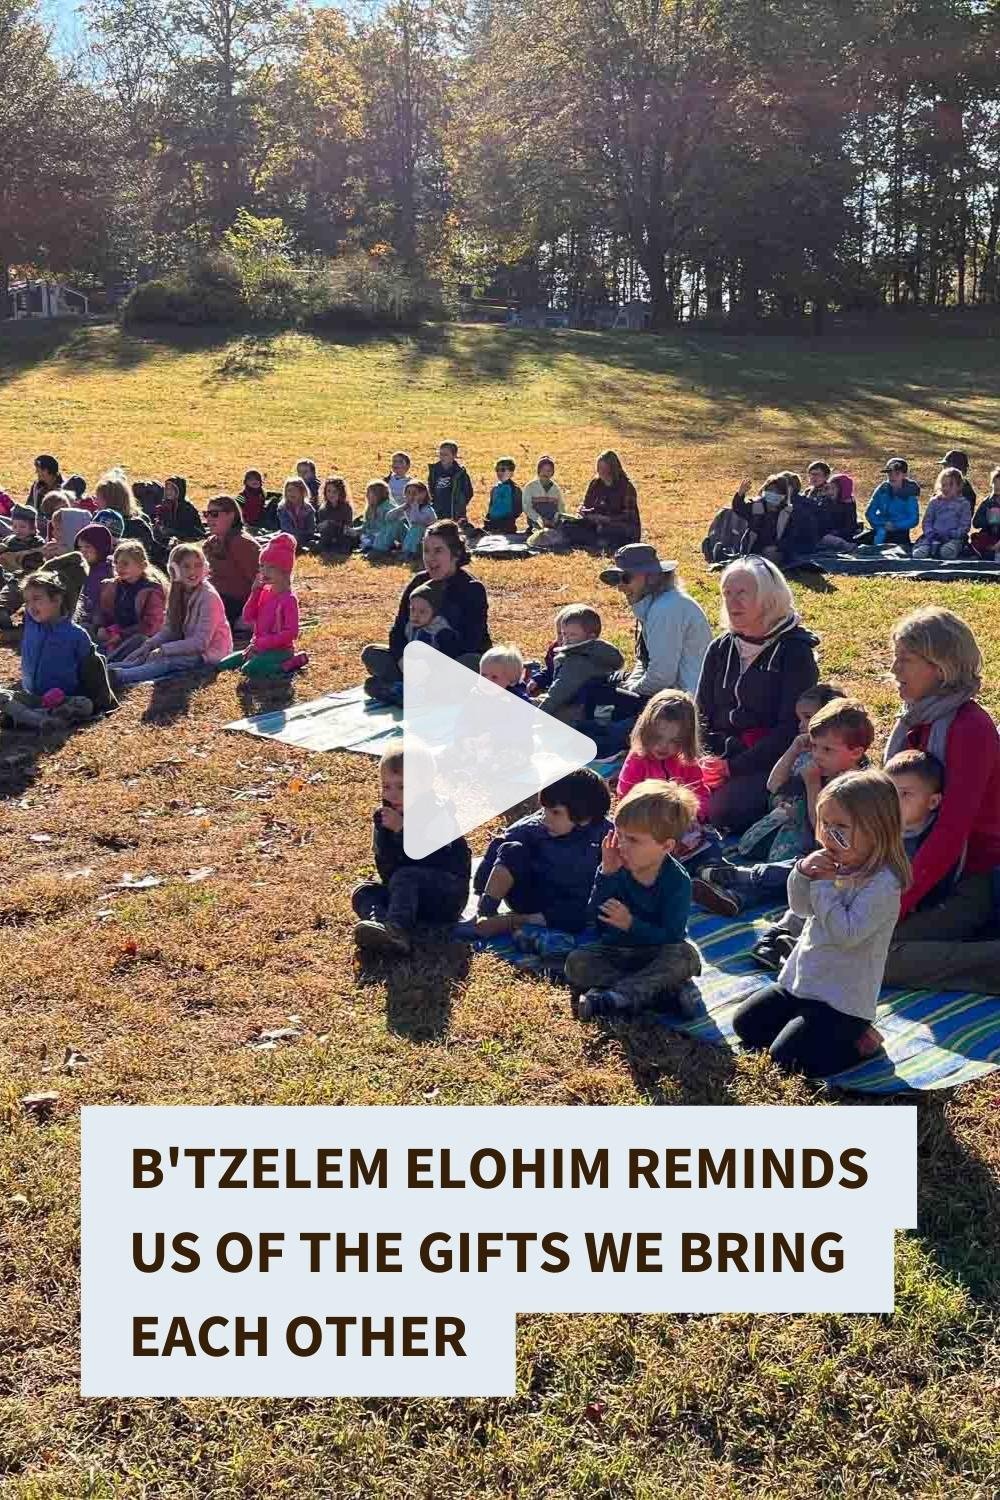 Cover image of families and teachers gathered in the meadow displaying "B'Tzelem Elohim Reminds us of the gifts we bring each other" that opens CBI Forest School Instagram Reel link in new window